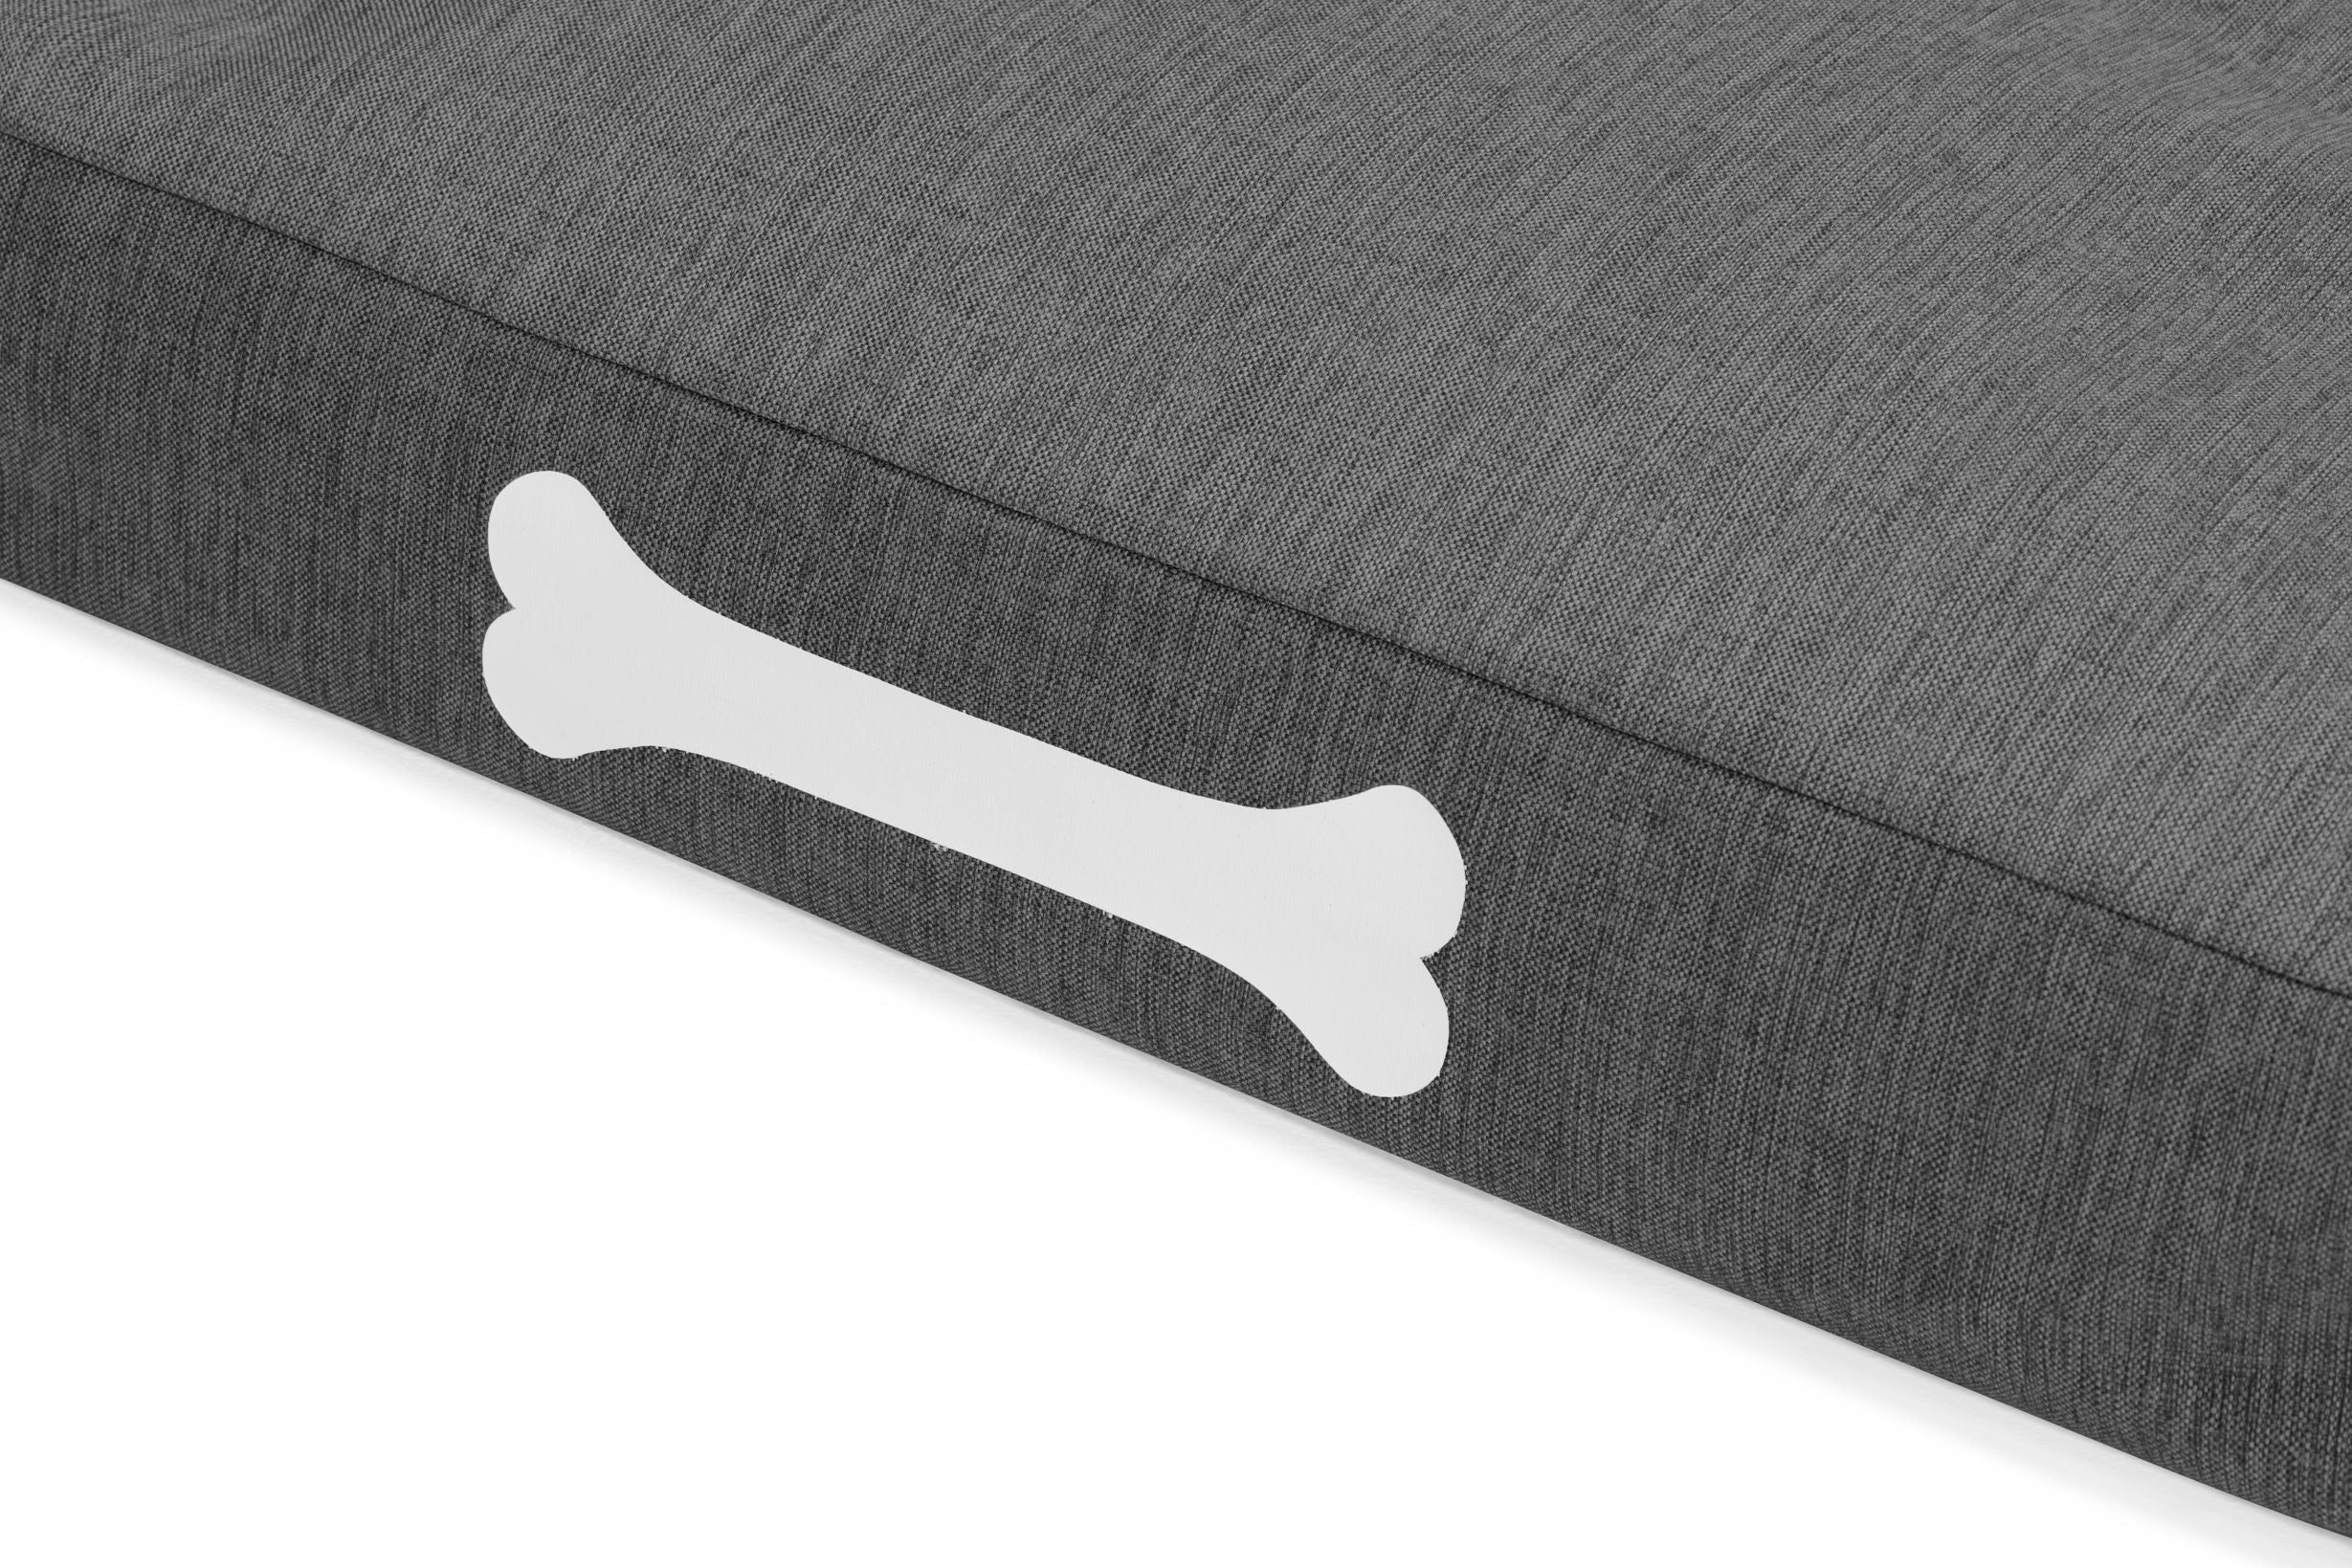 Fatboy Doggielounge olefin dogbed groot, rotsgrijs